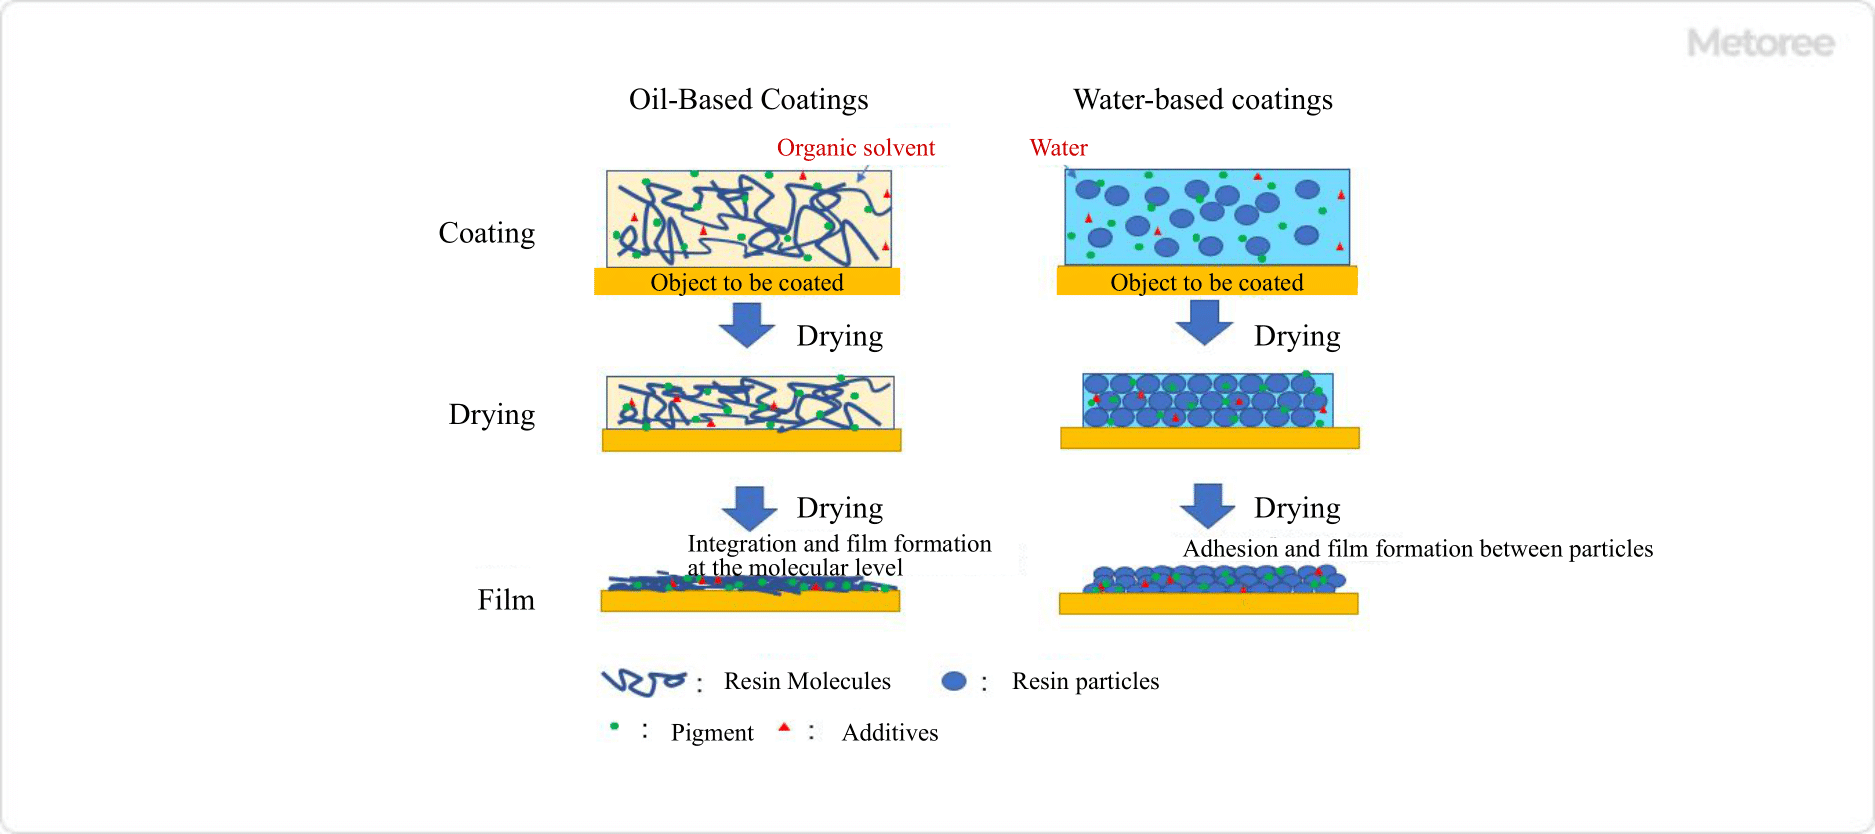 Figure 1. Difference between oil-based and water-based paints